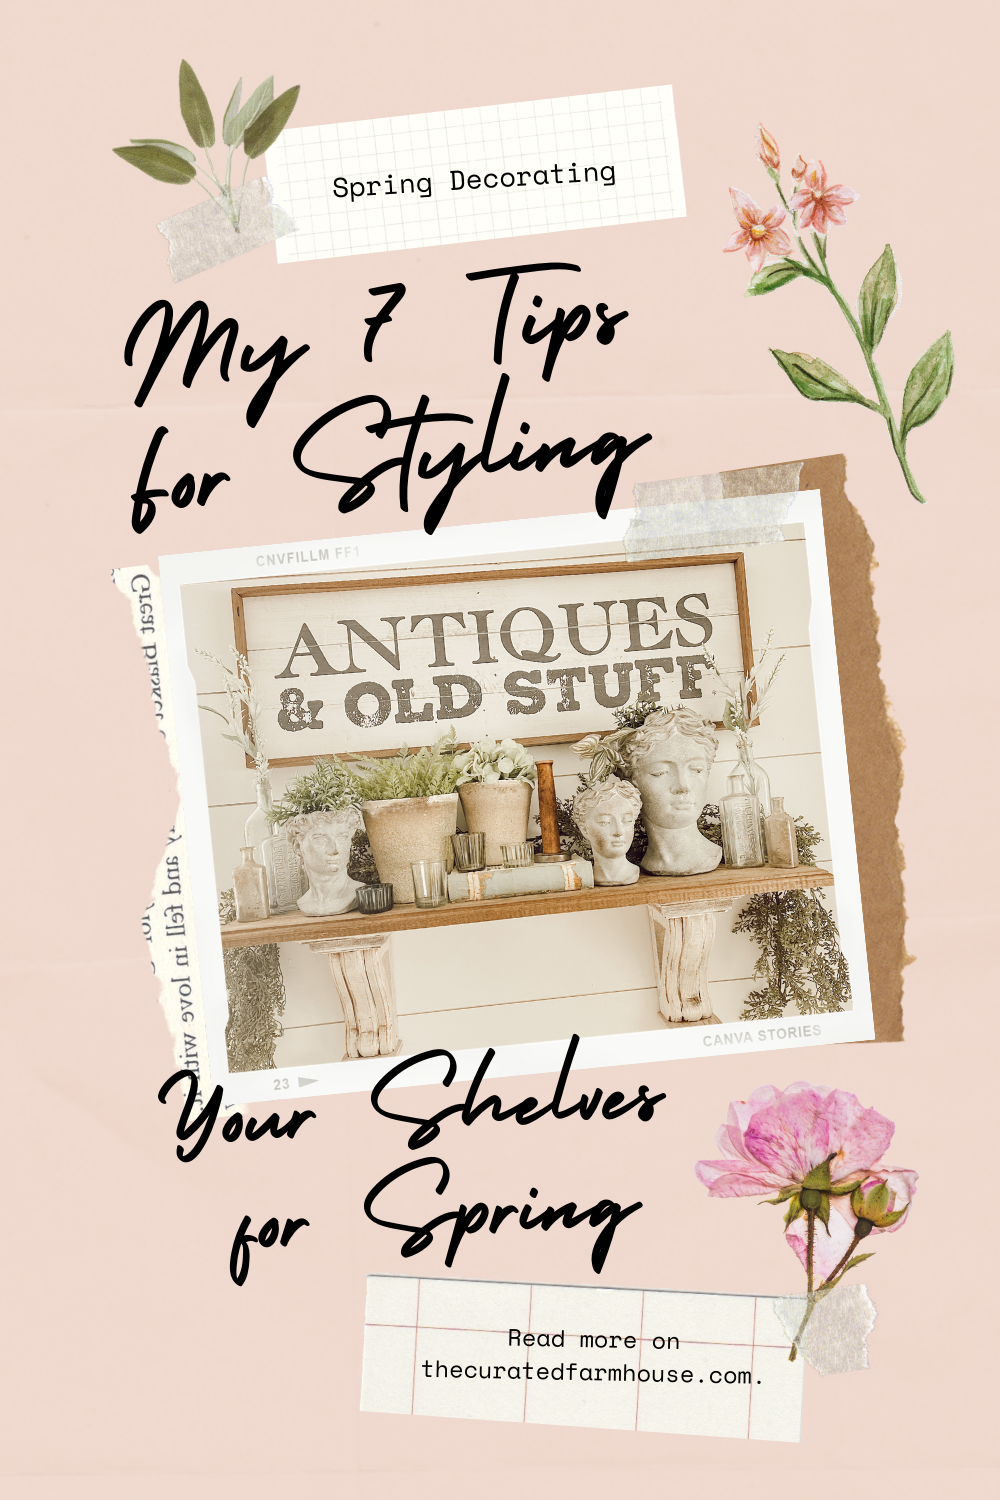 Quick and Easy Ways To Style Your Shelves for Spring